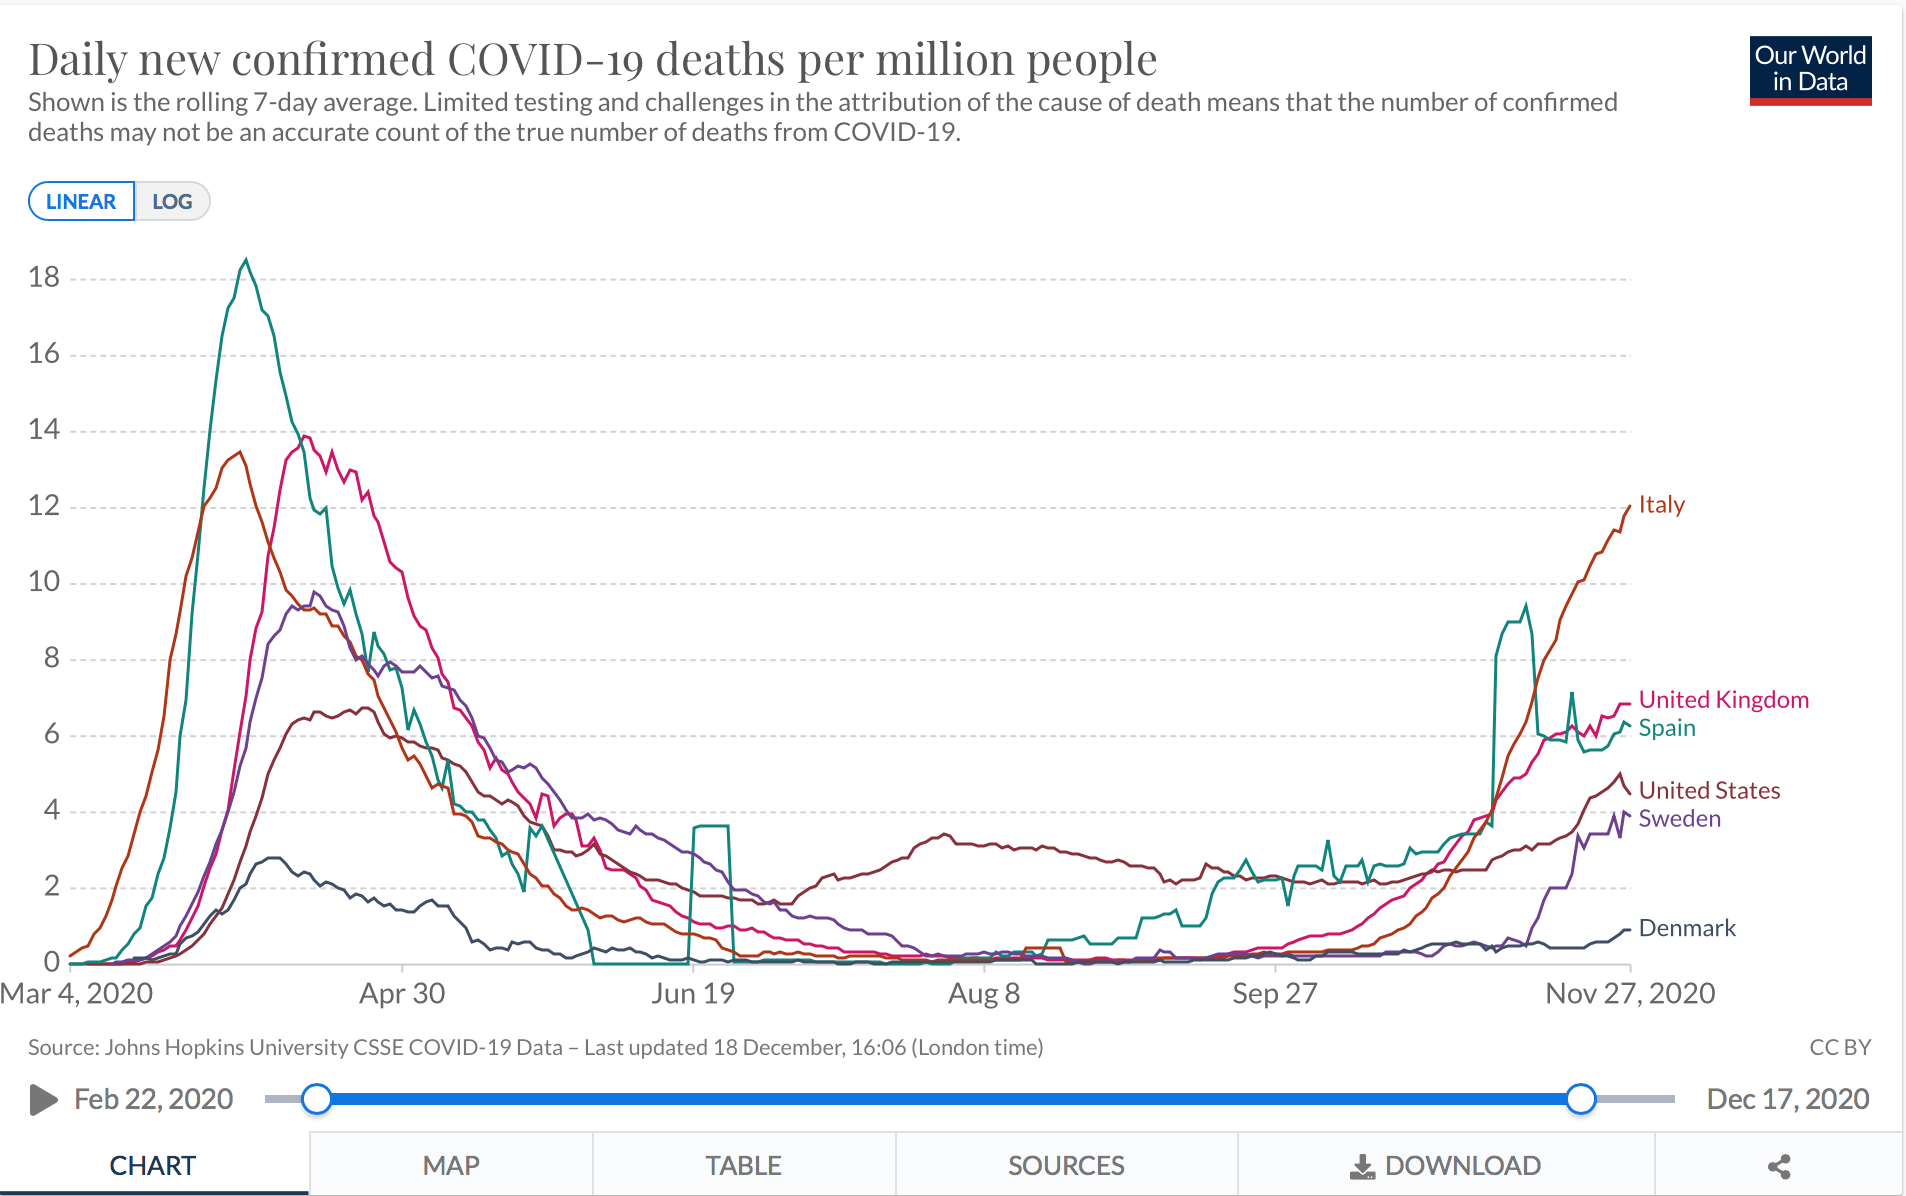 Daily new confirmed COVIC-19 deaths per million people